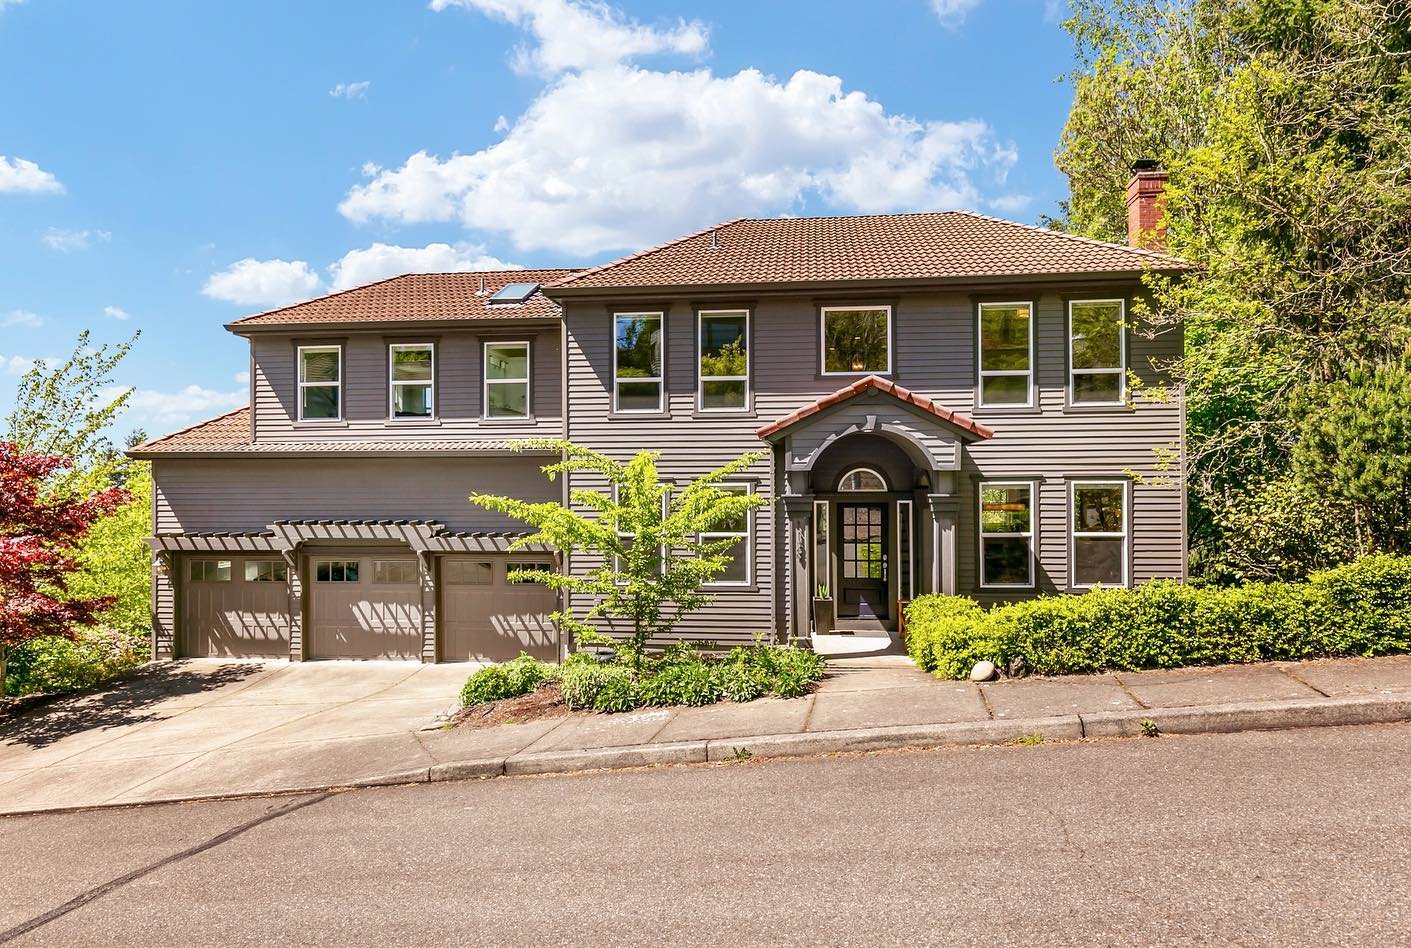 Portland certainly has it&rsquo;s share of spectacular homes. I lived in SE Portland for 25 years and only recently moved to Camas, WA.

I am fortunate to have established a strong client base in Oregon which has me visiting Portland on a regular bas